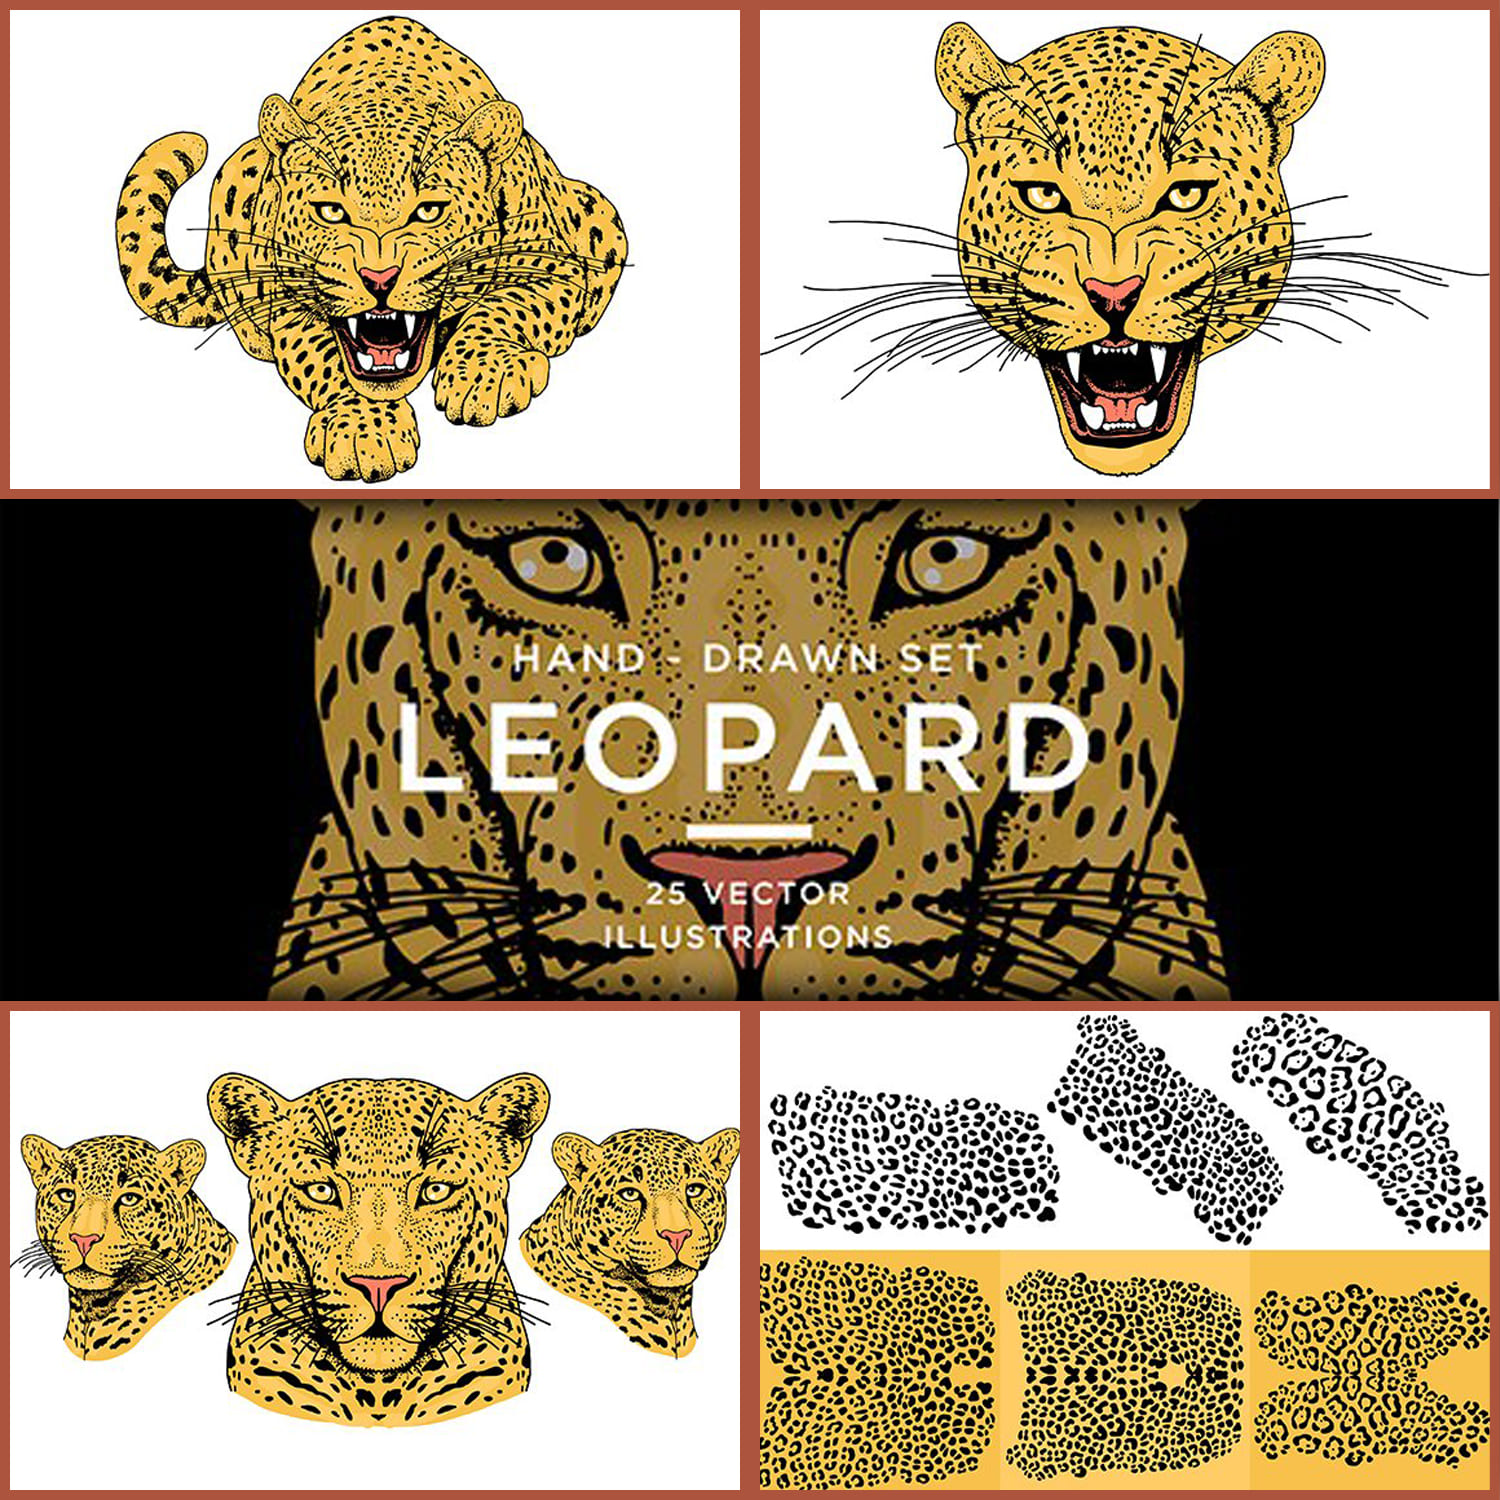 LEOPARD cover.